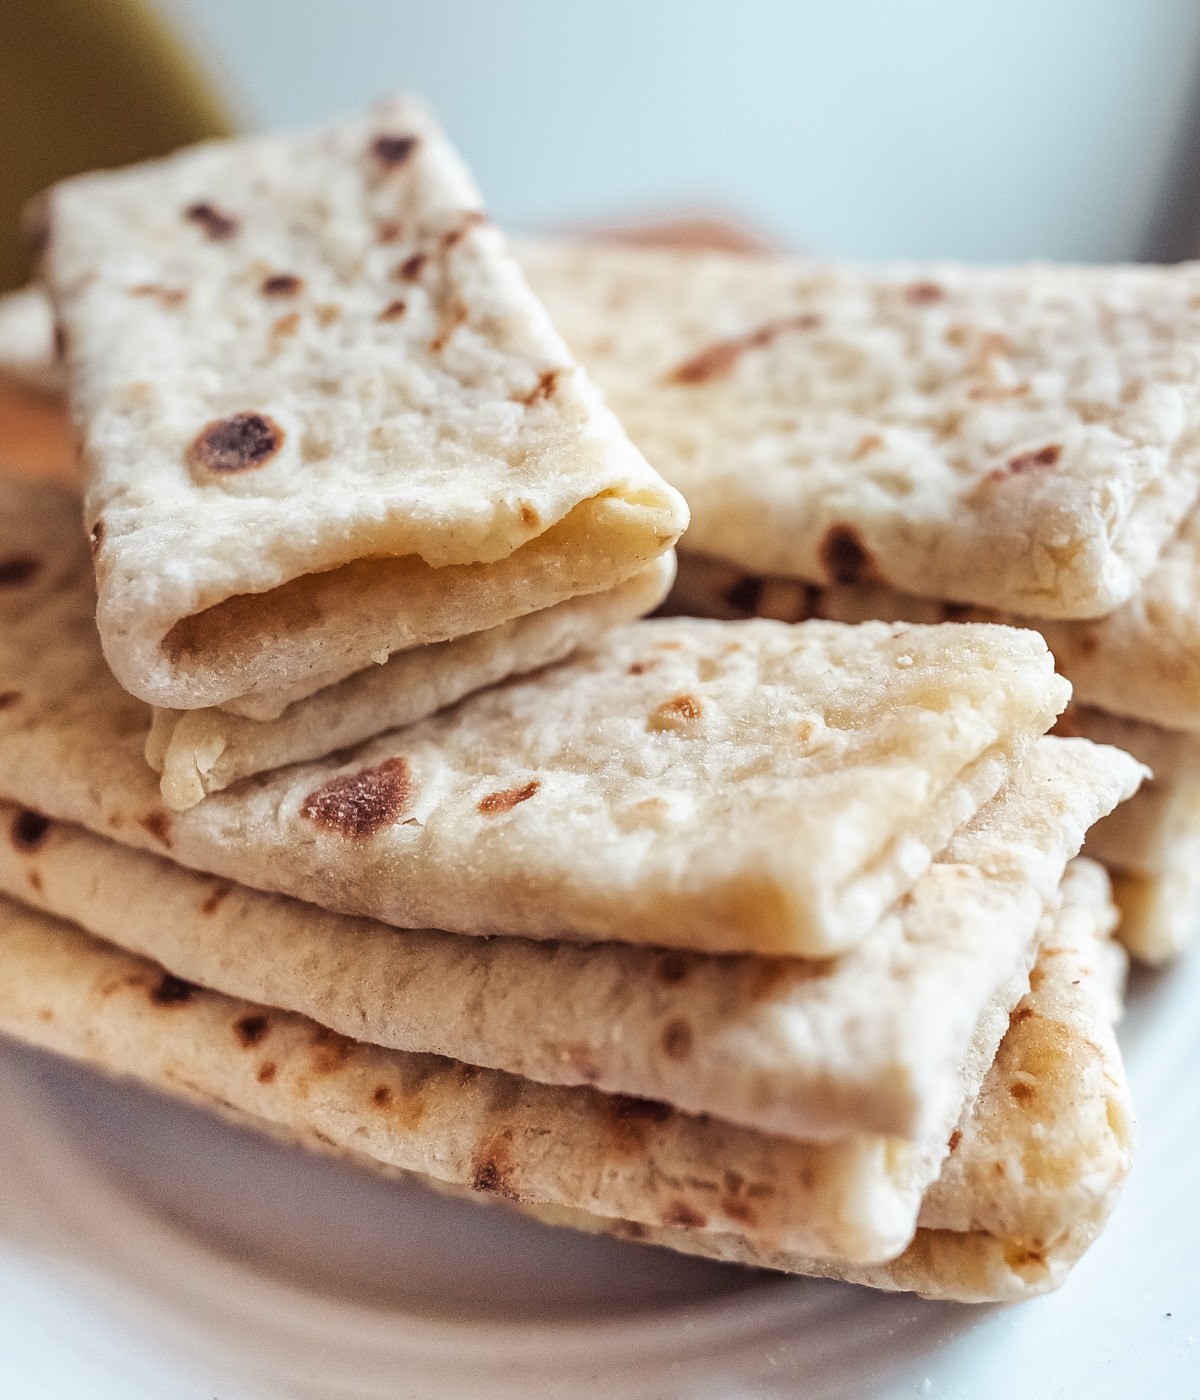 Norwegian lefse with kling - butter and sugar filling